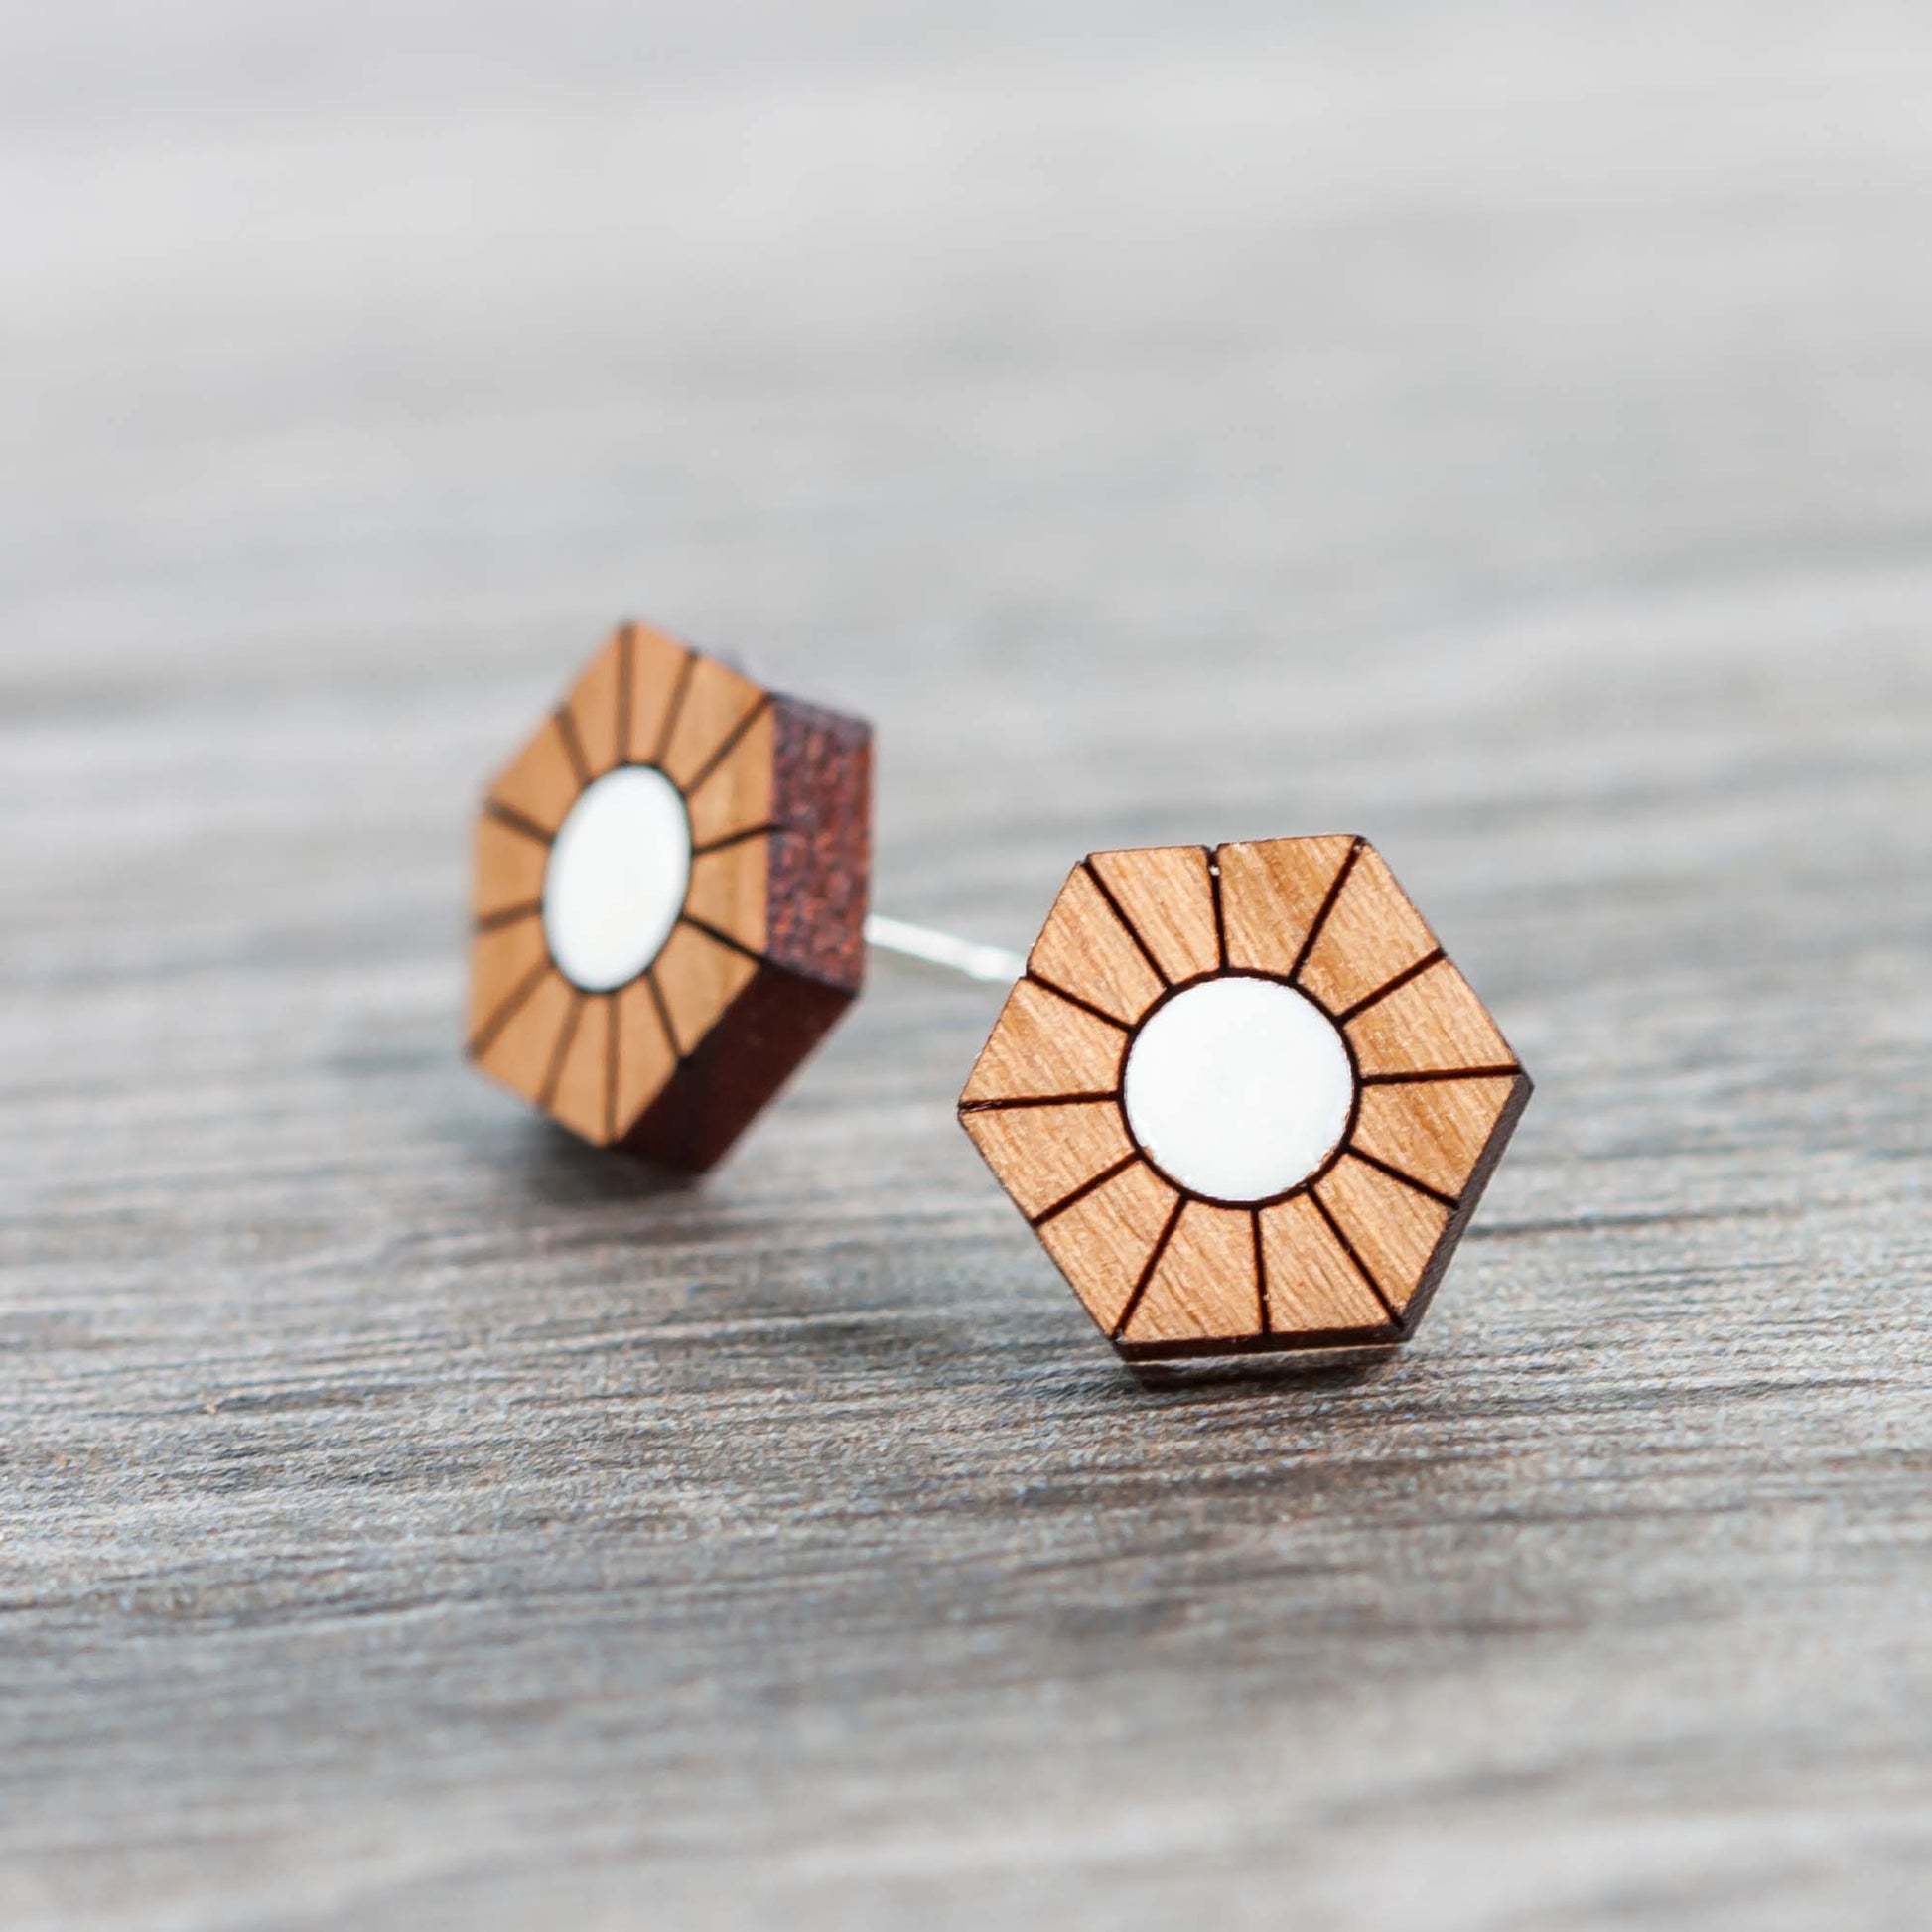 Wooden Laser Cut Earrings - Cherry with White Sun Hexagon - by LeeMo Designs in Bend, Oregon